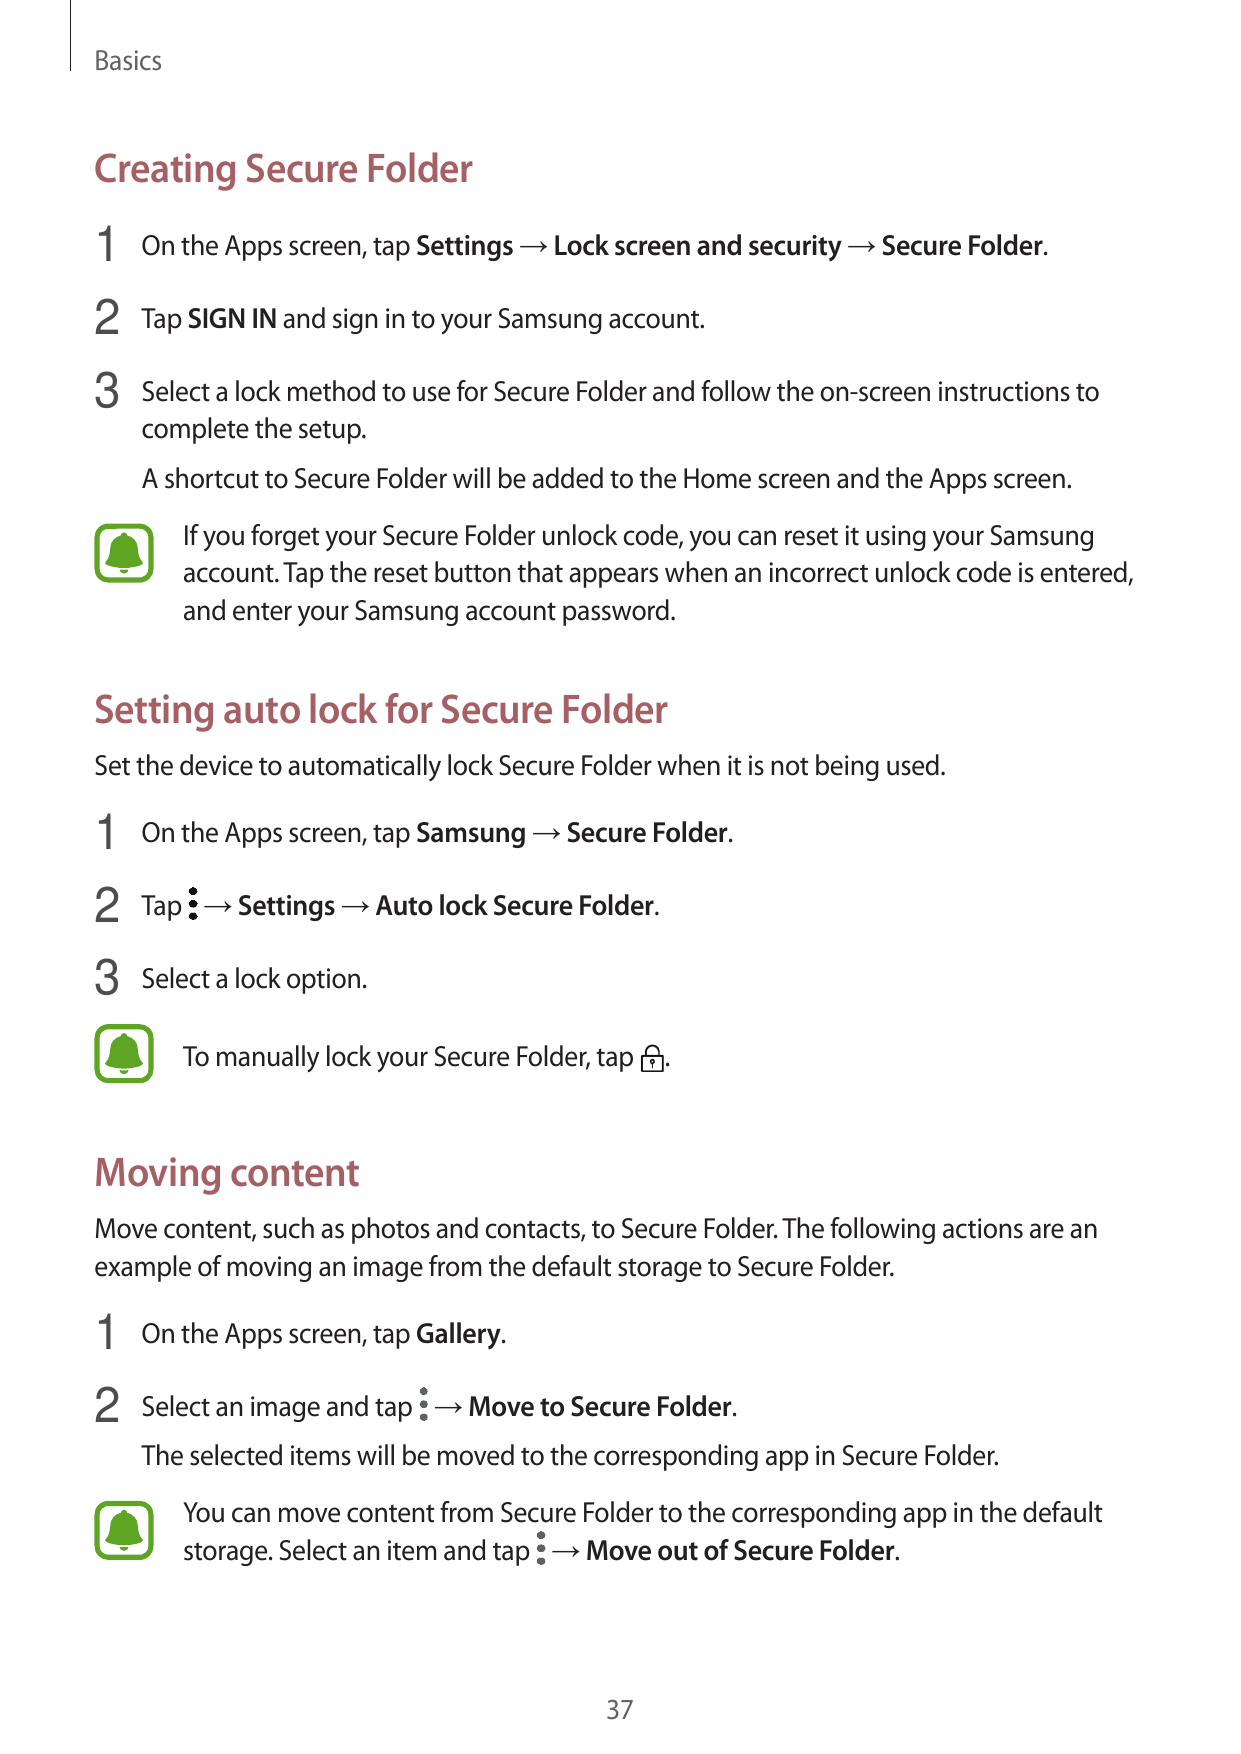 BasicsCreating Secure Folder1 On the Apps screen, tap Settings → Lock screen and security → Secure Folder.2 Tap SIGN IN and sign